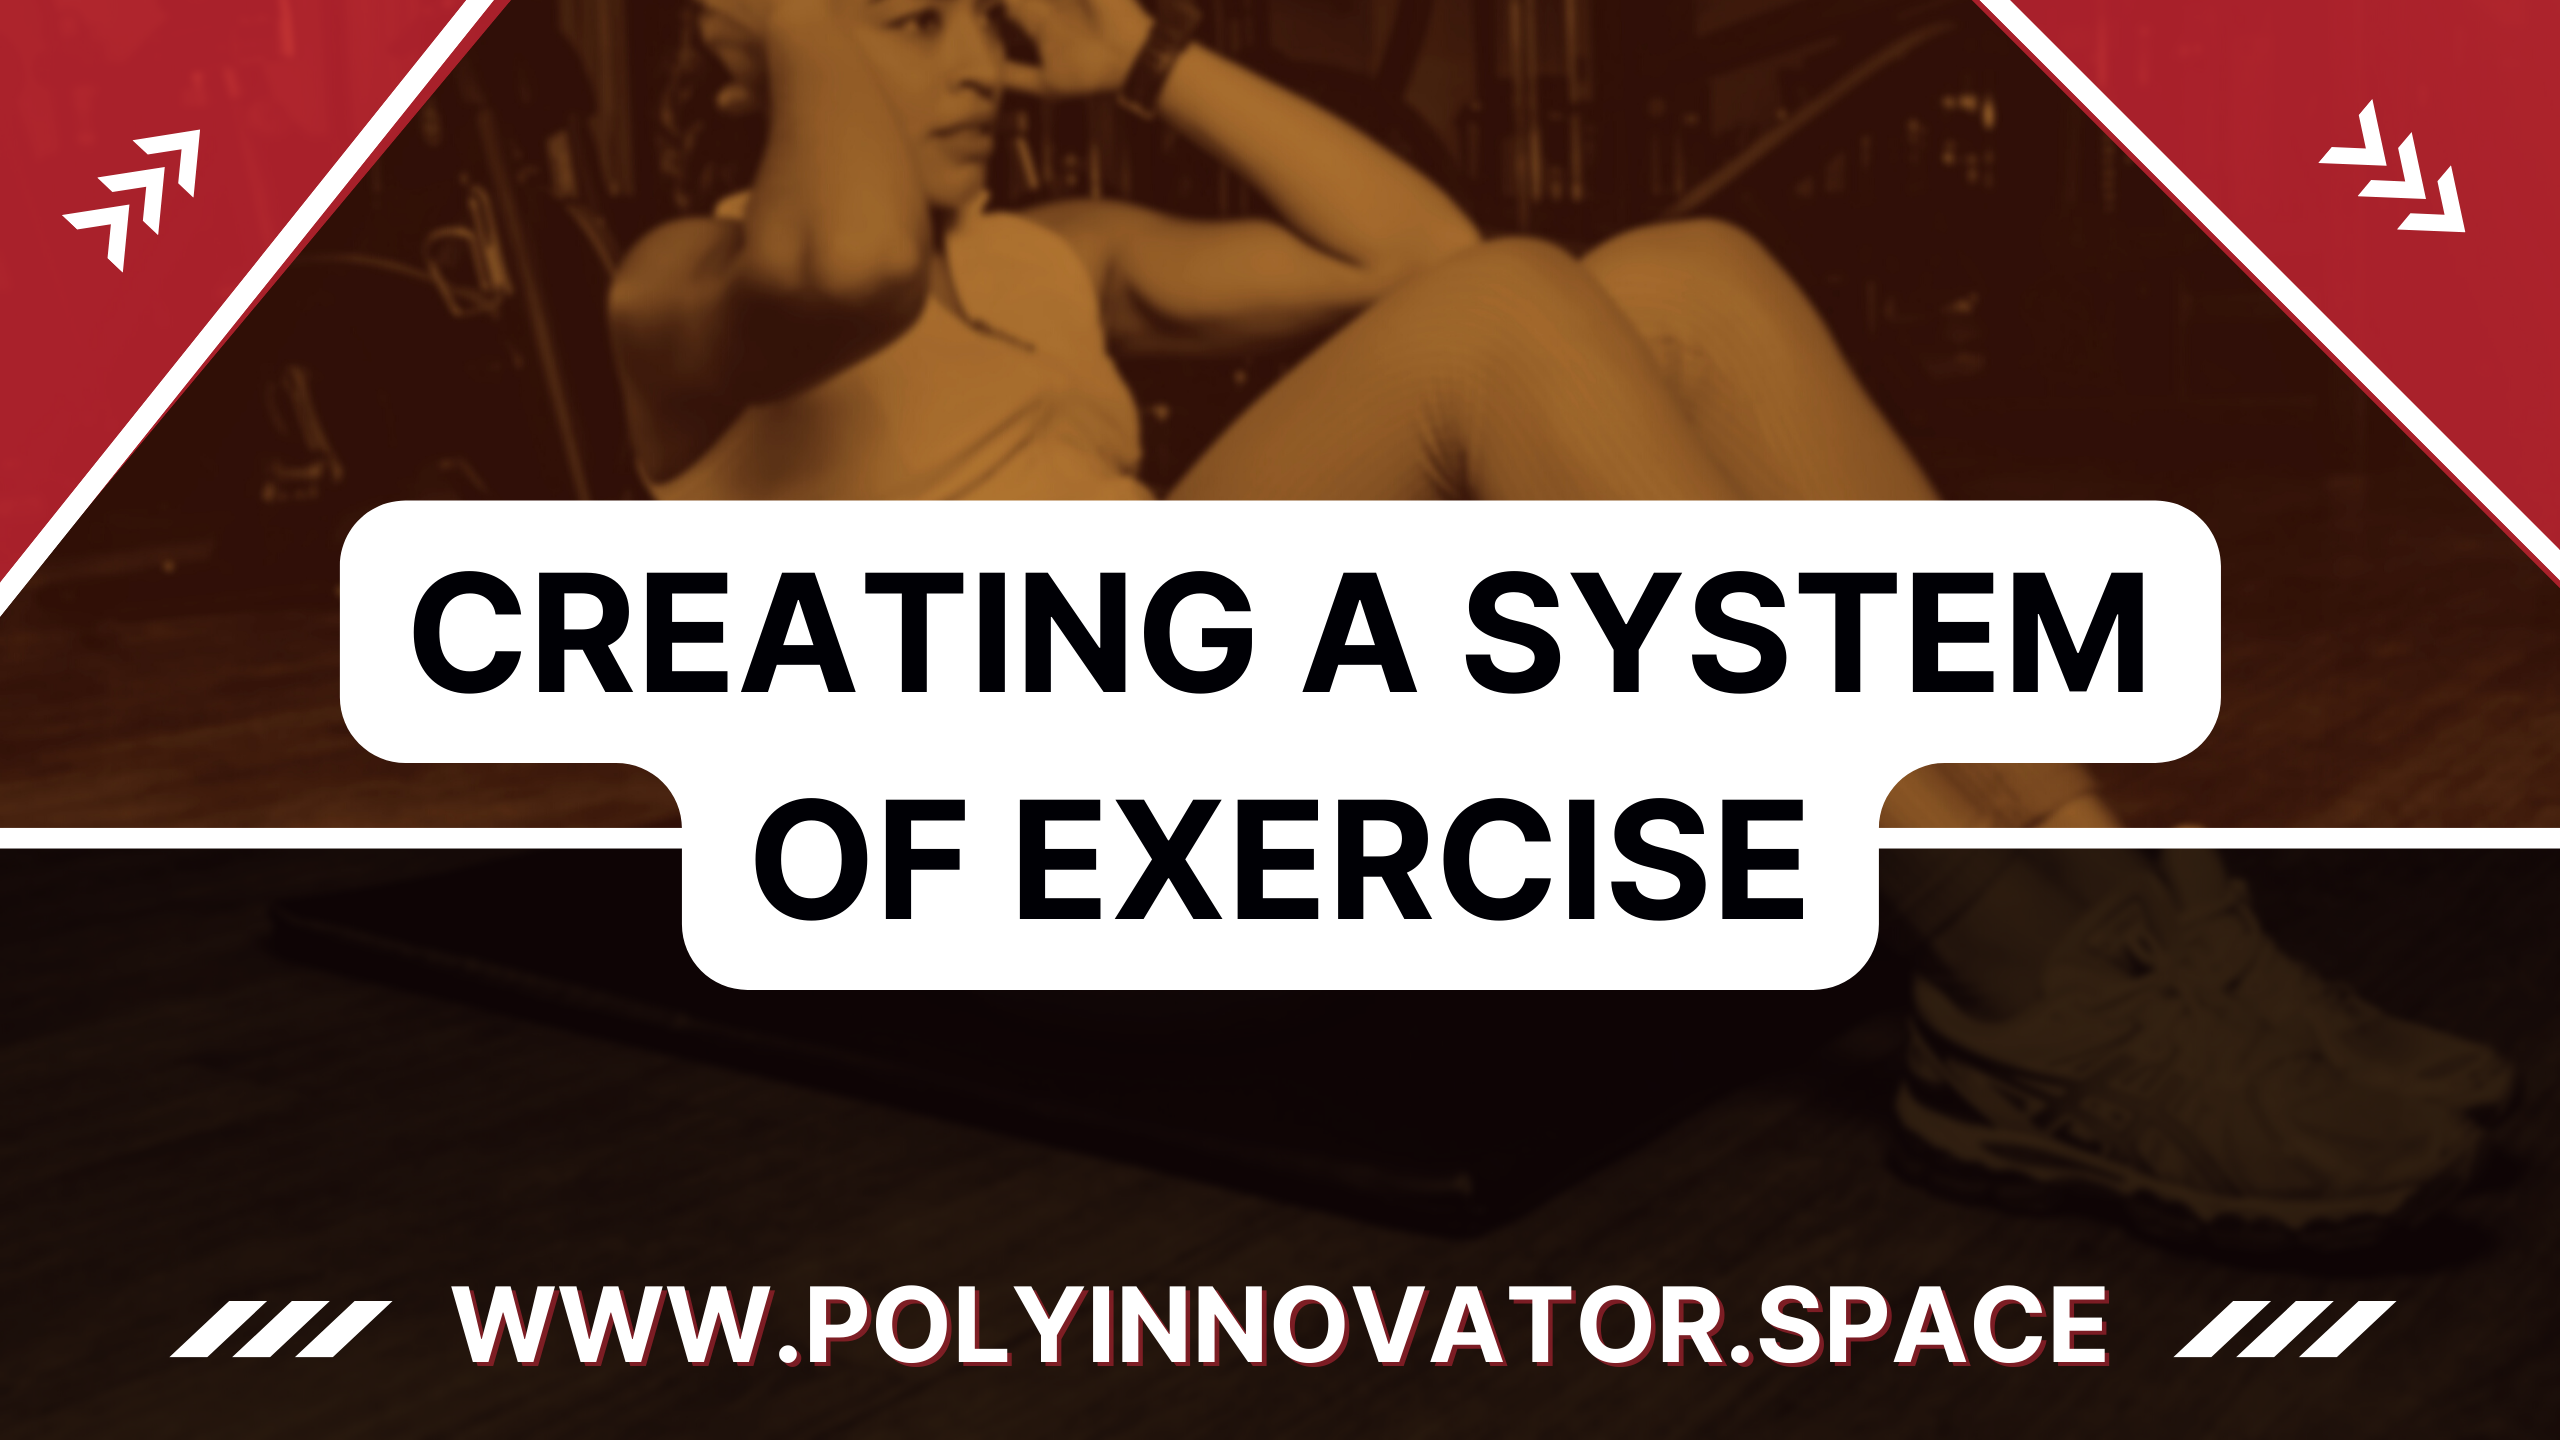 Creating a System of Exercise